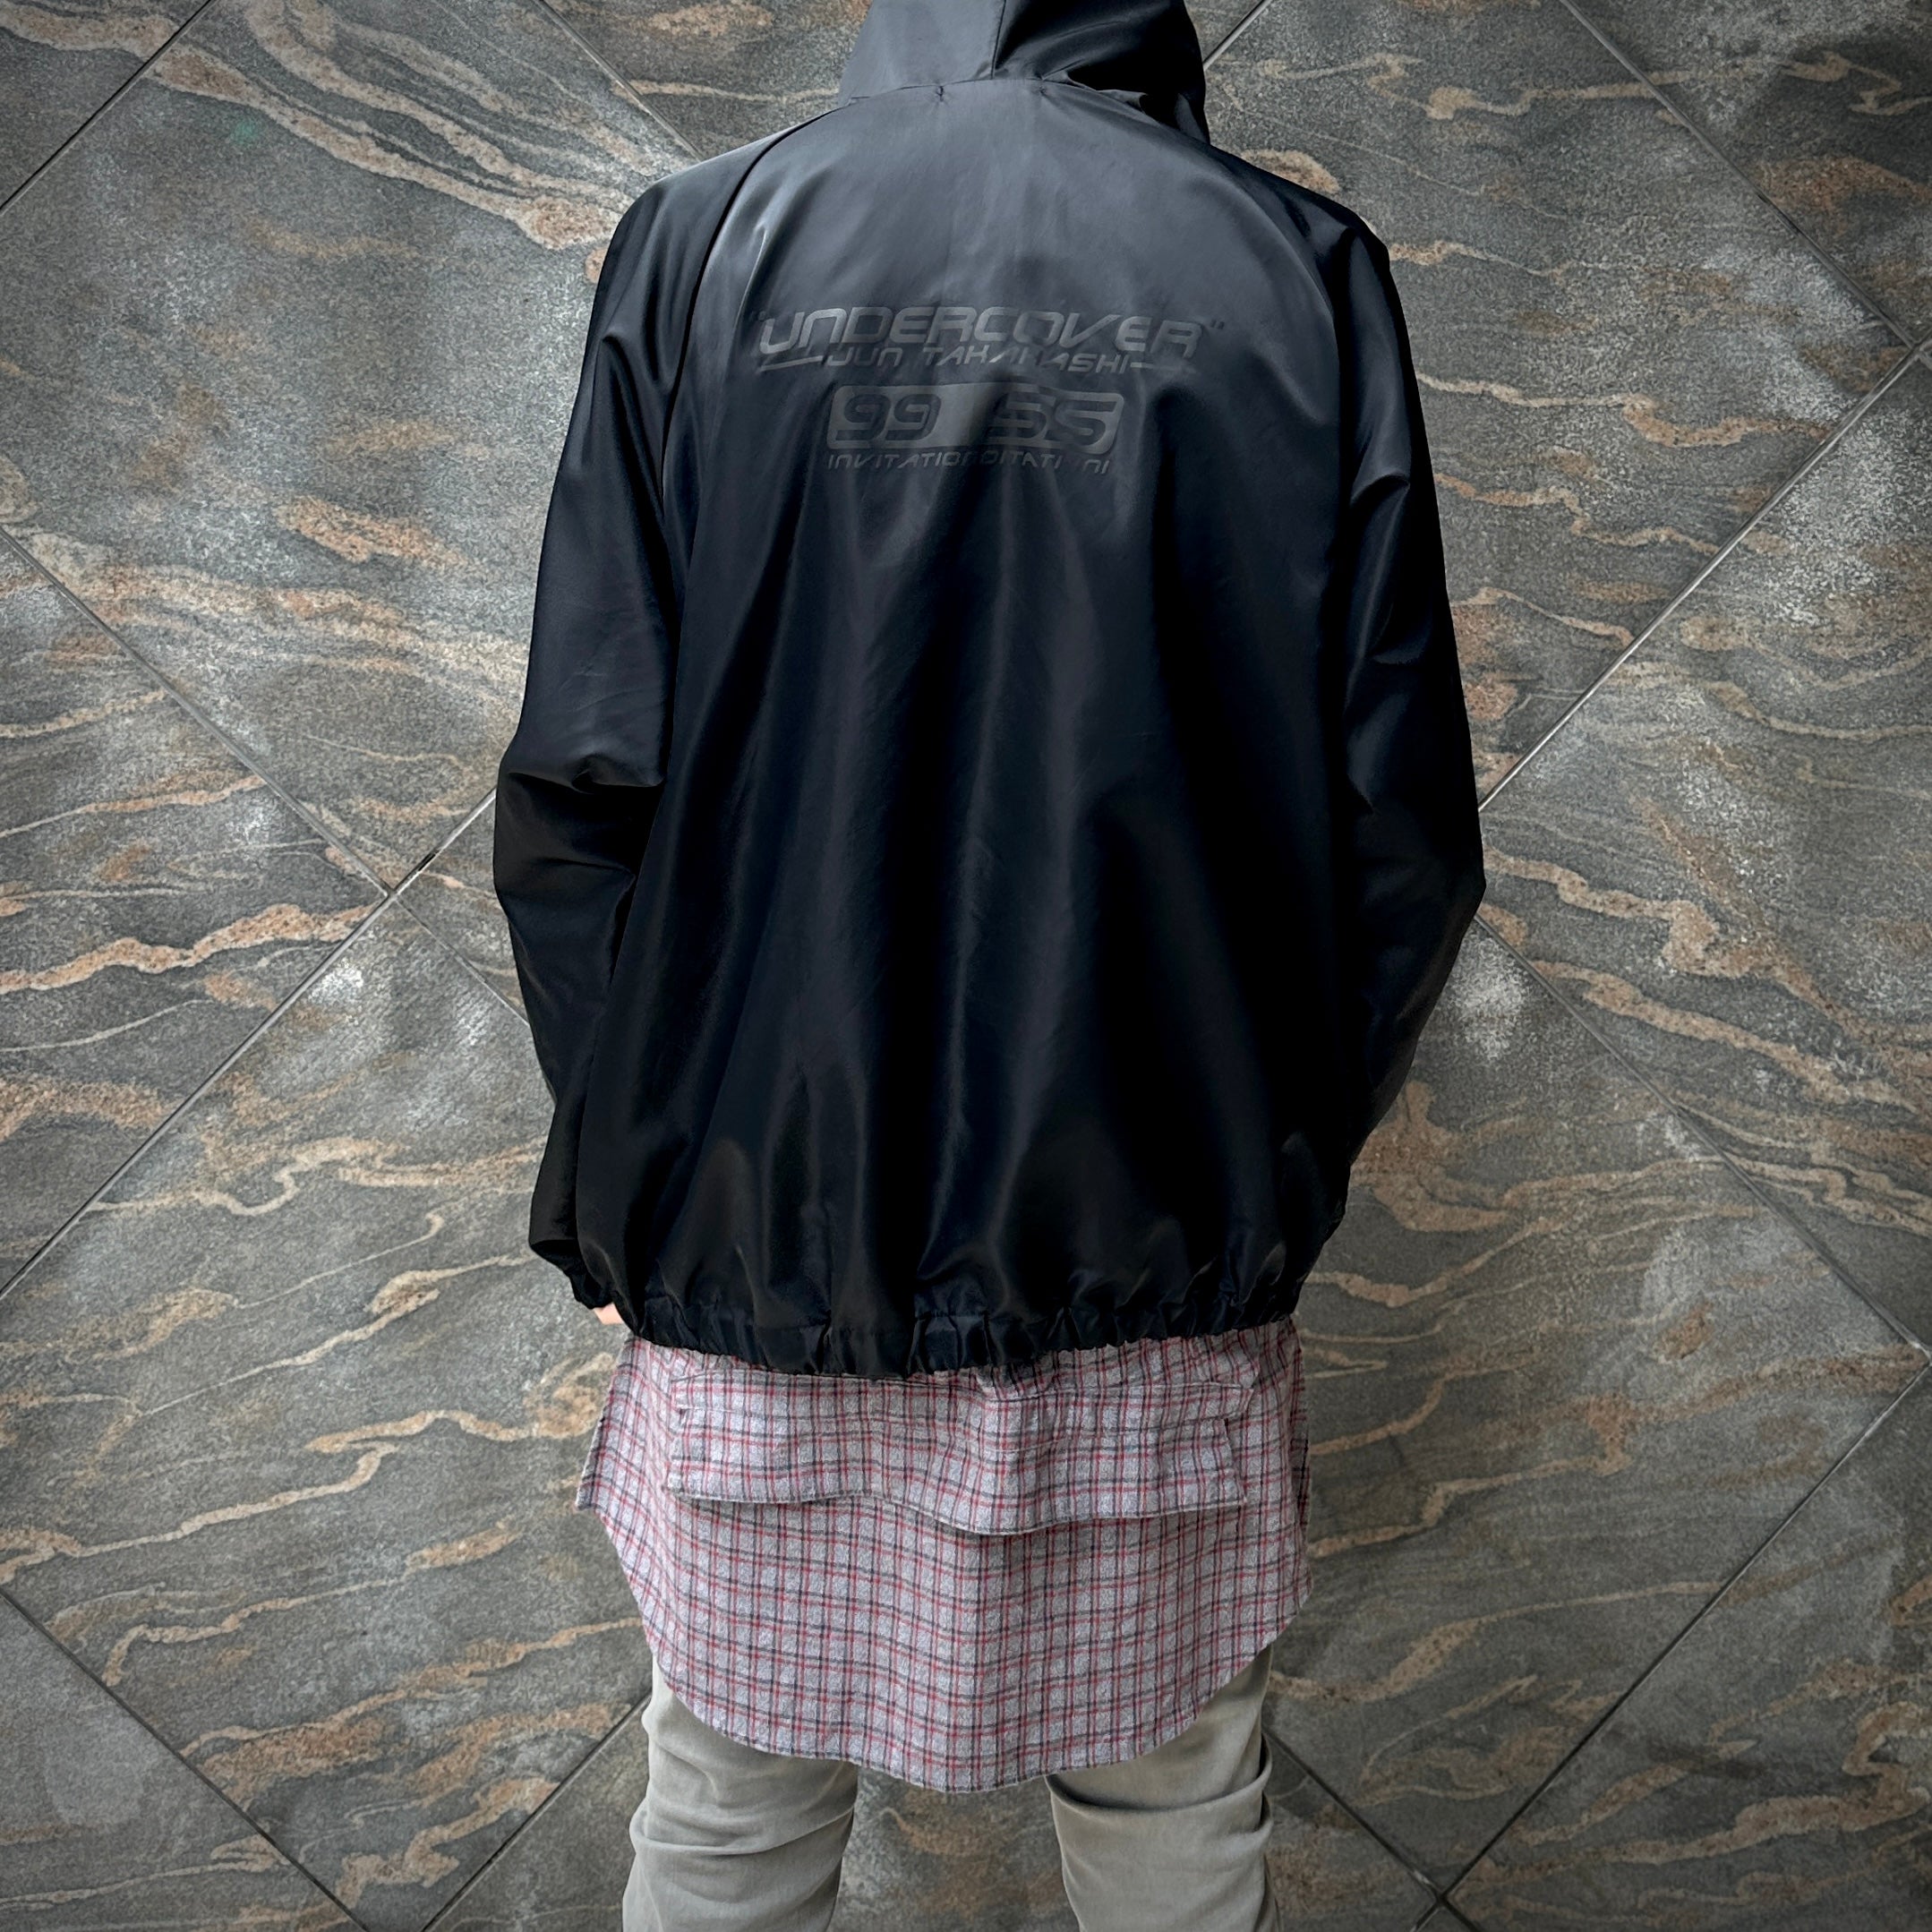 CONCEPT SHOP WTS -ARCHIVES & SNEAKERS- / UNDERCOVER 99SS F&F ...